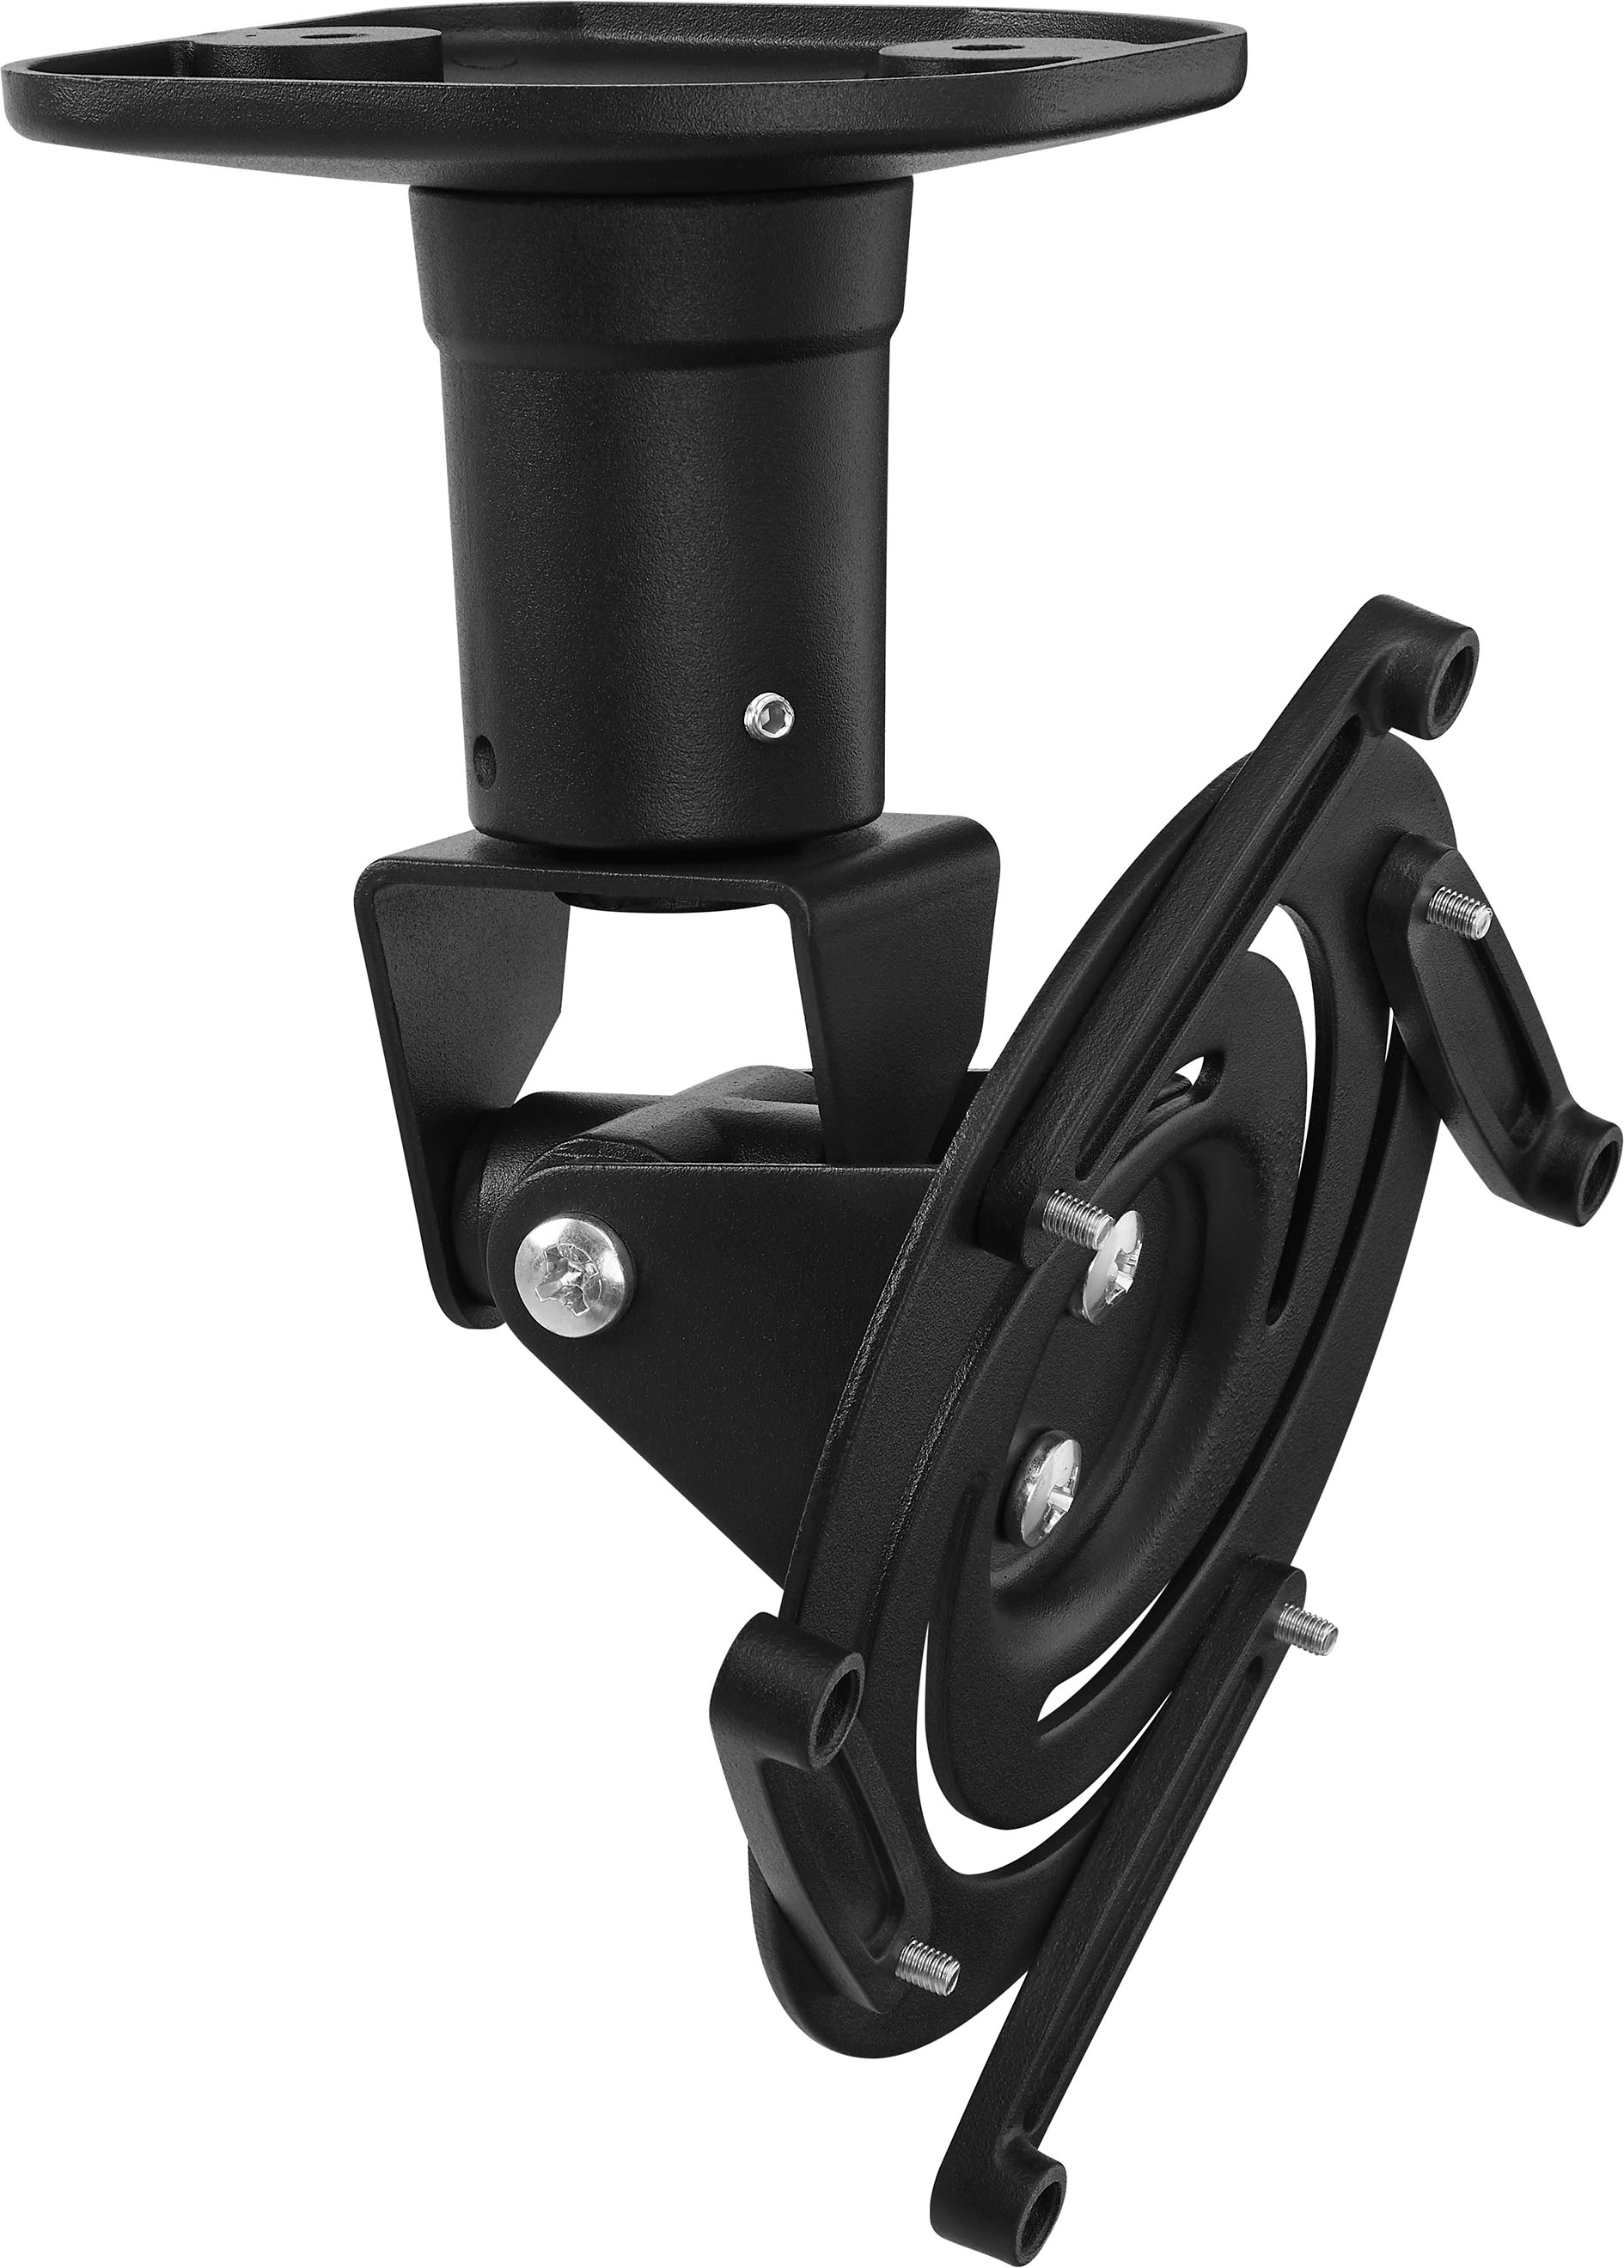 Angle View: Insignia™ - Universal Projector Ceiling Mount - Black